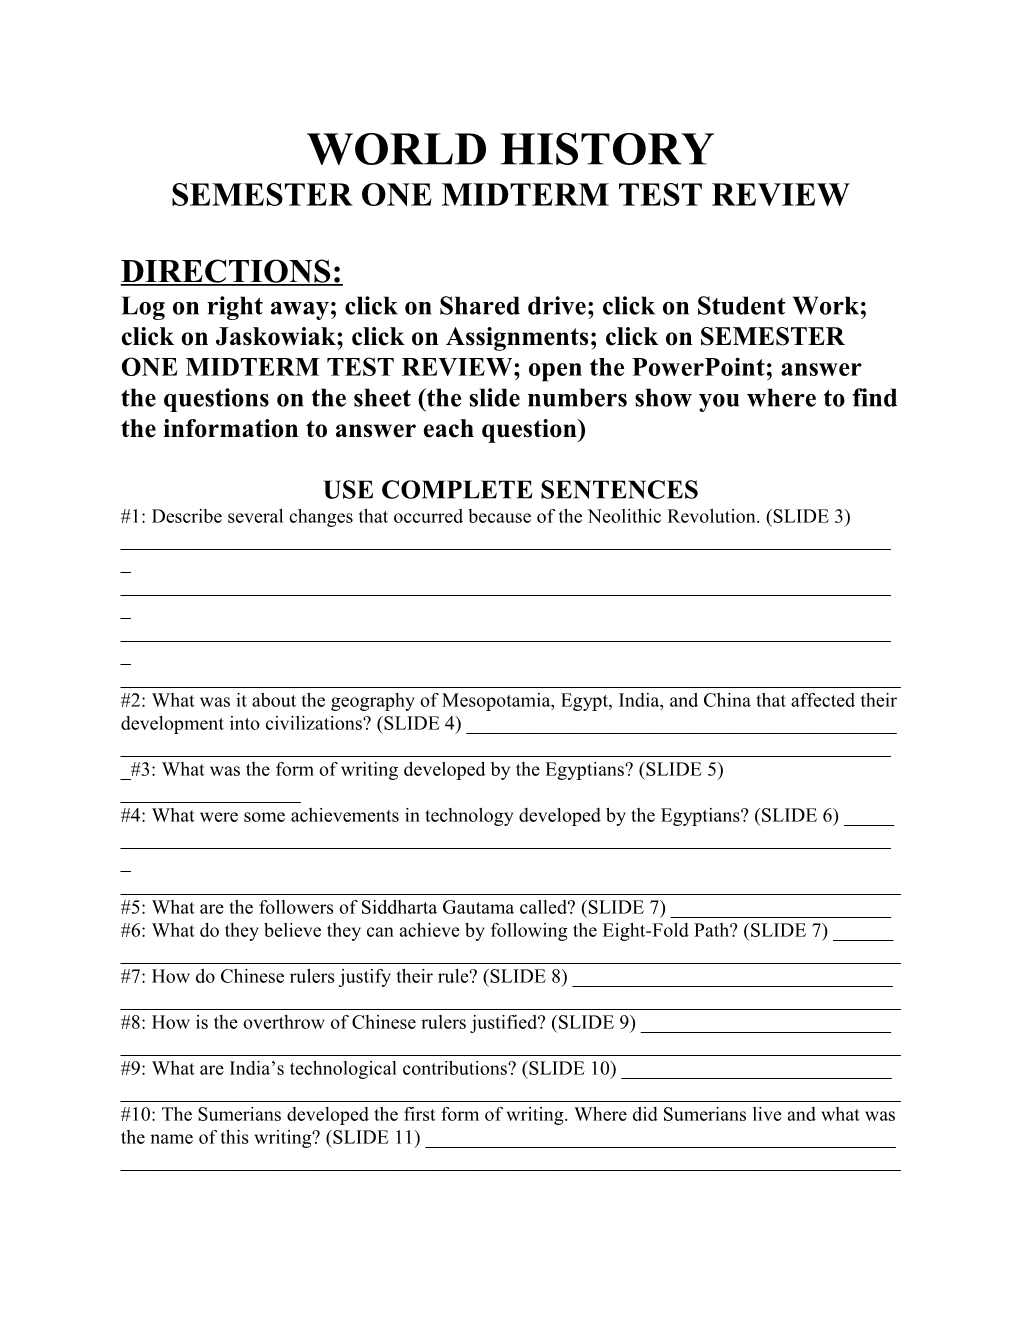 World History Semester One Midterm Test Review